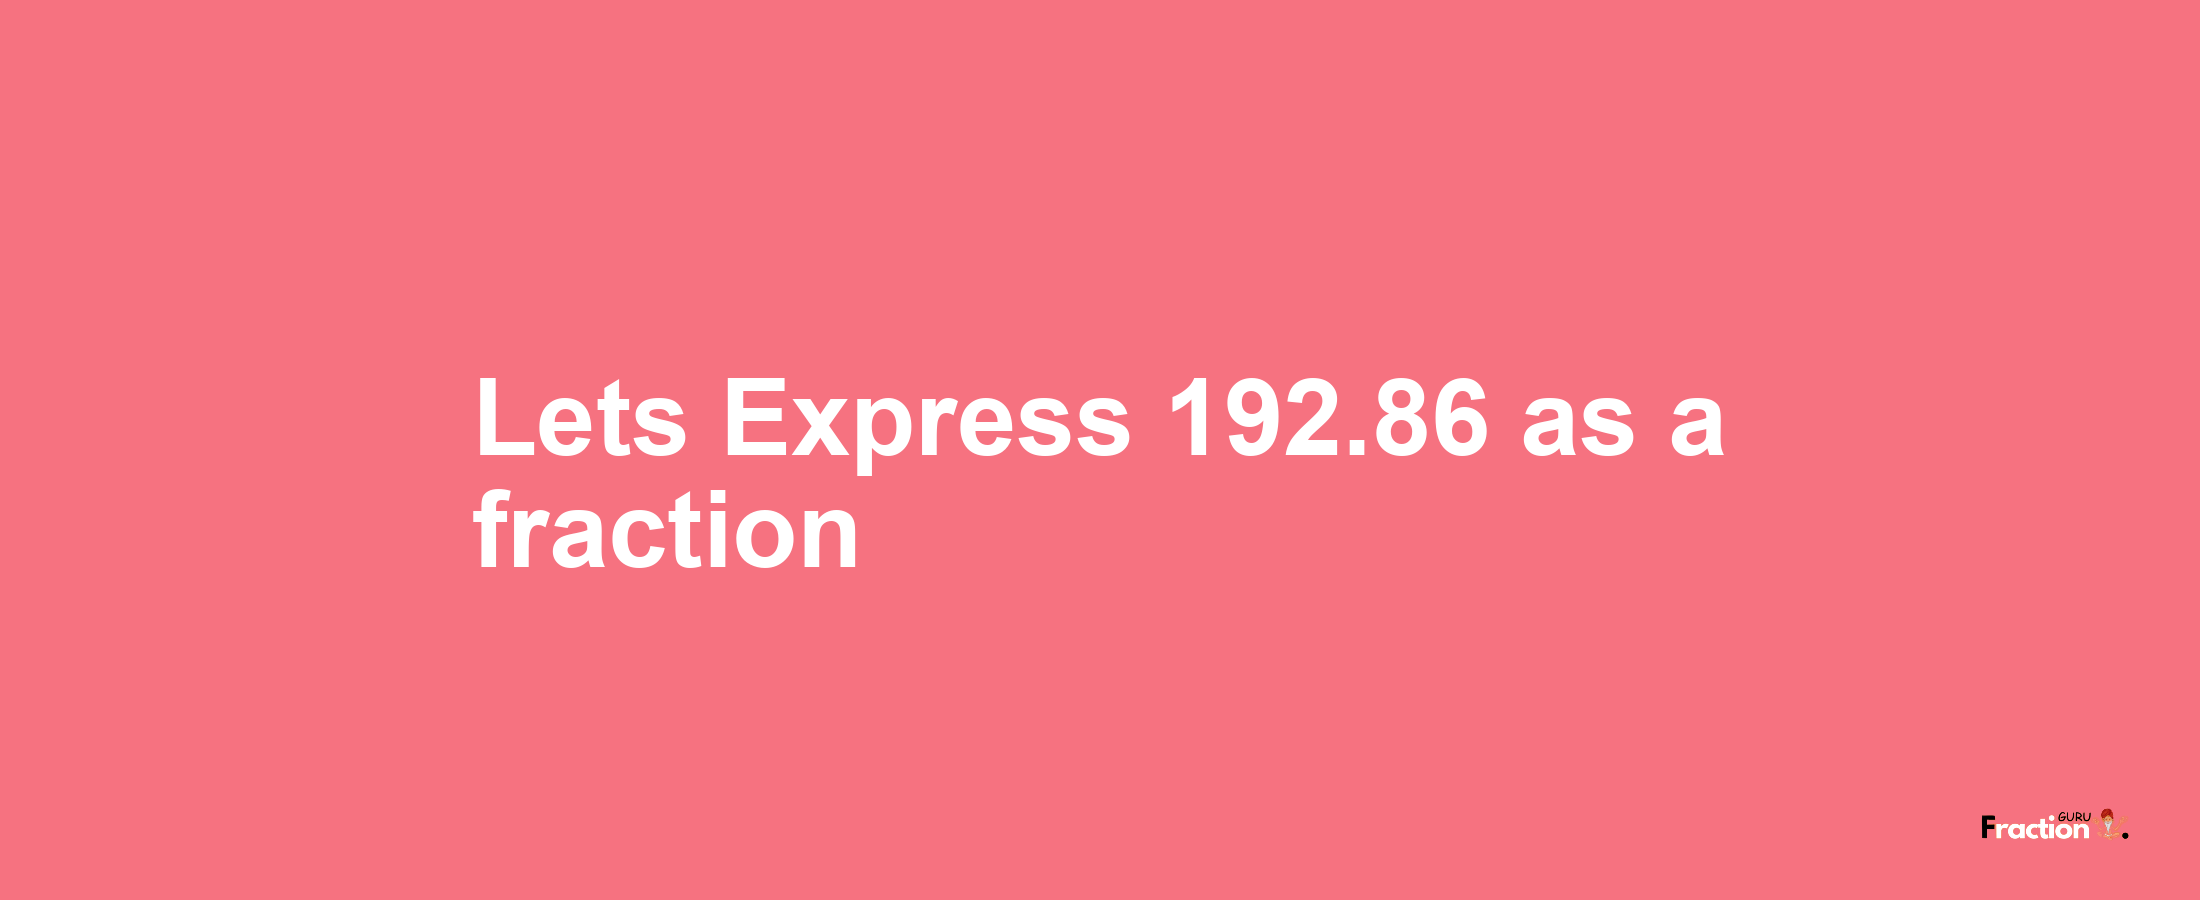 Lets Express 192.86 as afraction